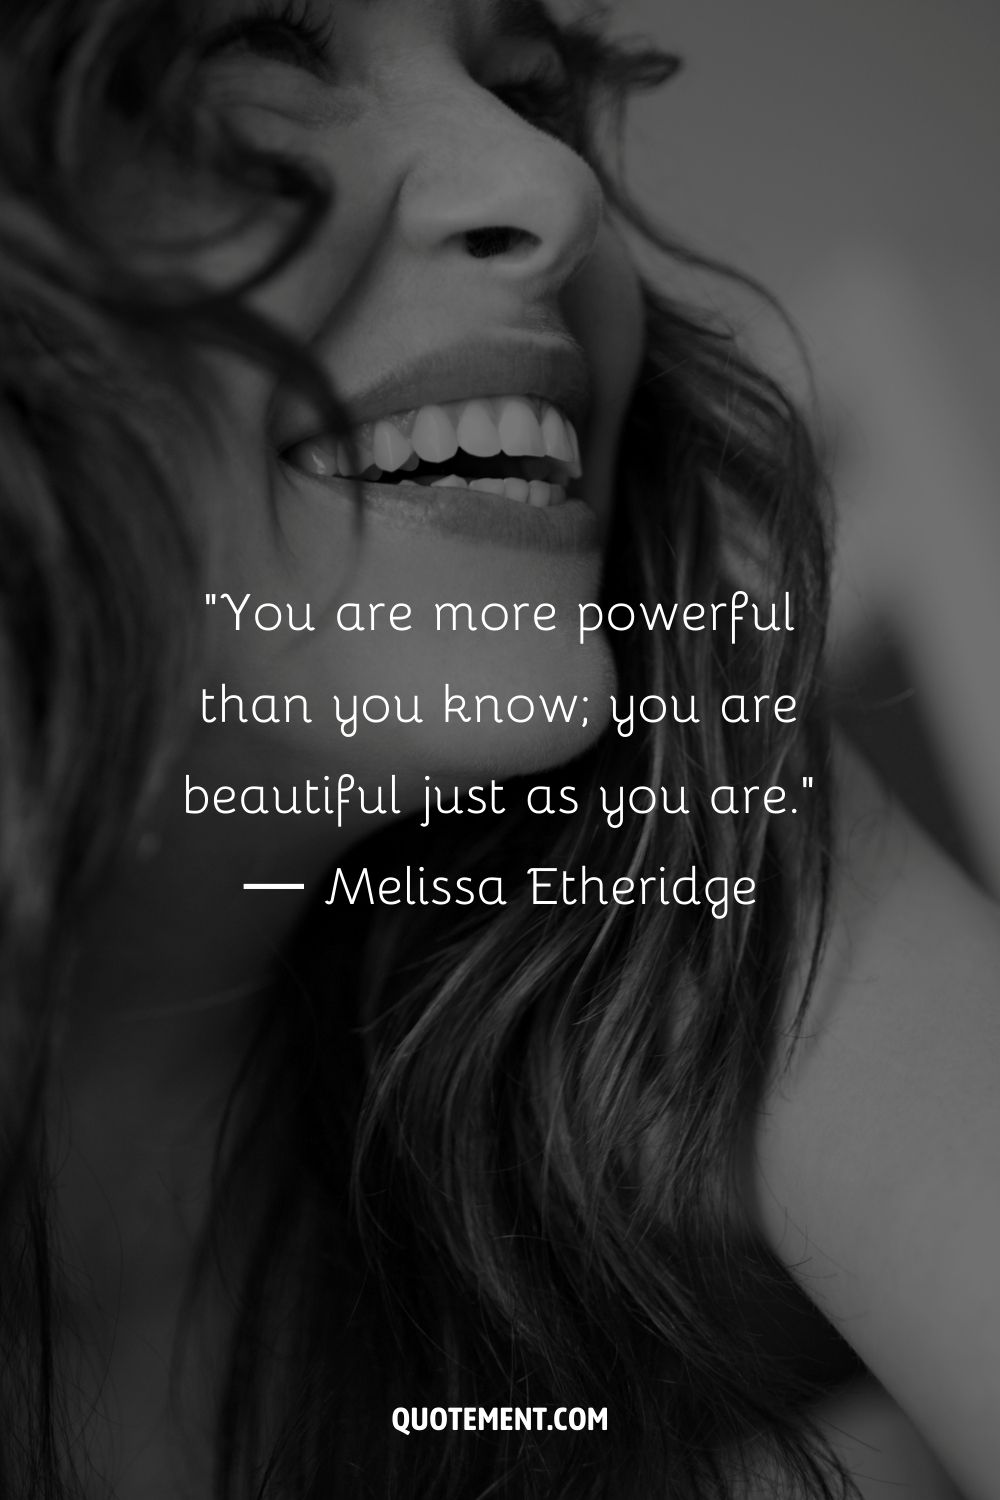 You are more powerful than you know; you are beautiful just as you are. ― Melissa Etheridge